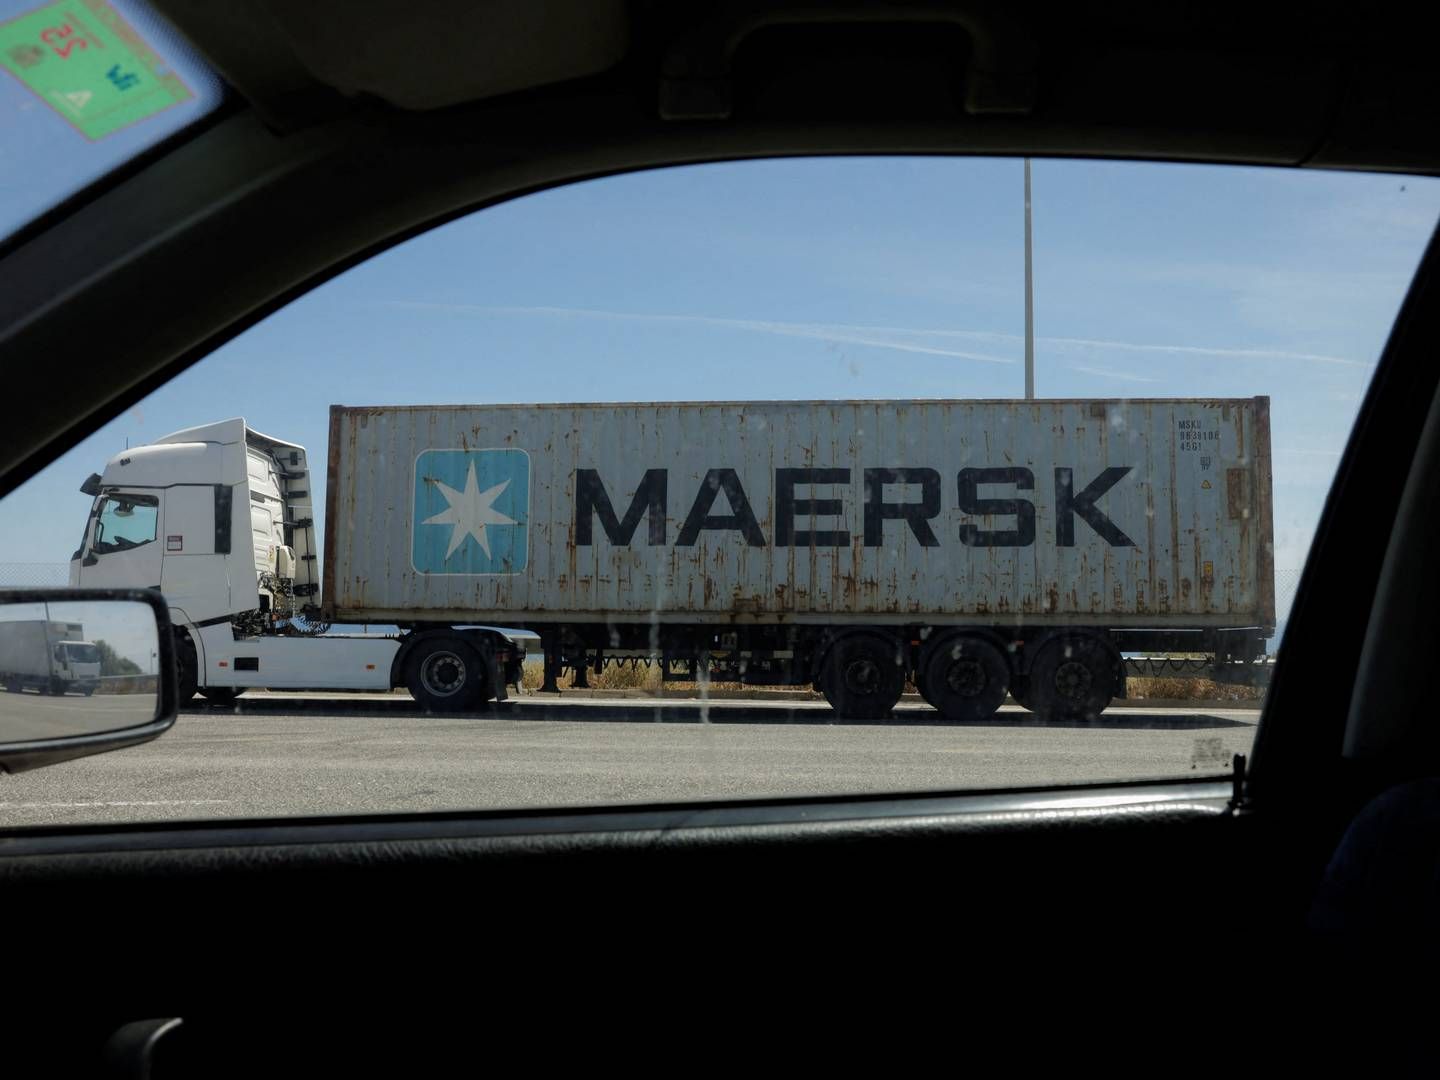 In 2016, Maersk decided to sell its oil business and instead become a pure transportation group that can handle freight all the way from the factory to the end user. As a result, the company now has a growing business on land. | Foto: Jon Nazca/Reuters/Ritzau Scanpix